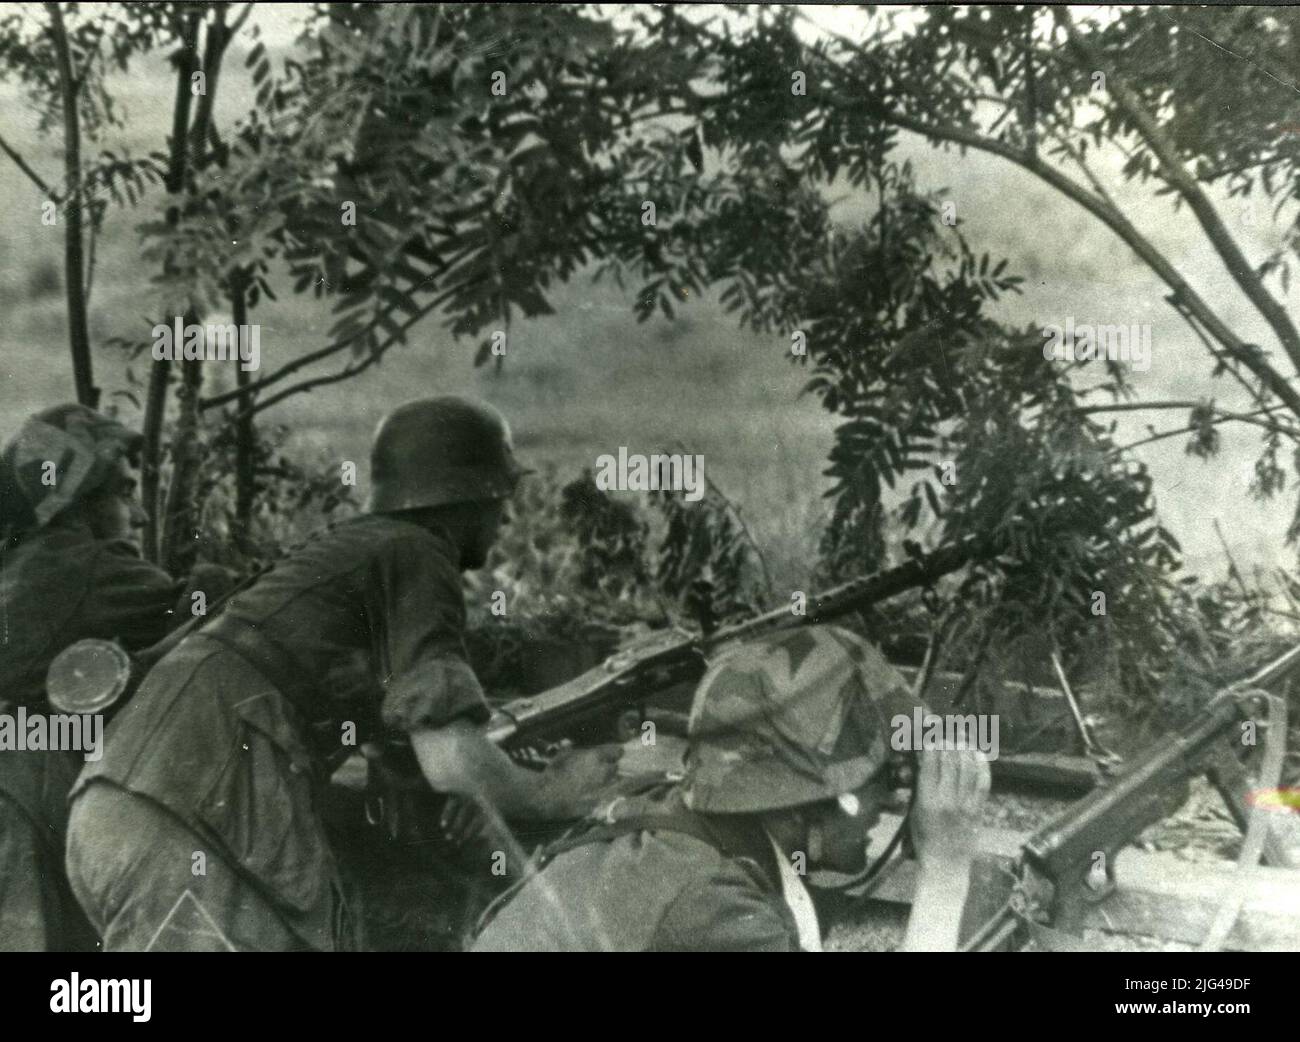 MG-34 machine gun stall. Three divisionaries in a trench with a light machine gun shot MG-34, a fourth character observes with prismatic, carrying a subfusil MP 40. They carry a helmet M 35, two of them with adjustable fabric covers. Stock Photo